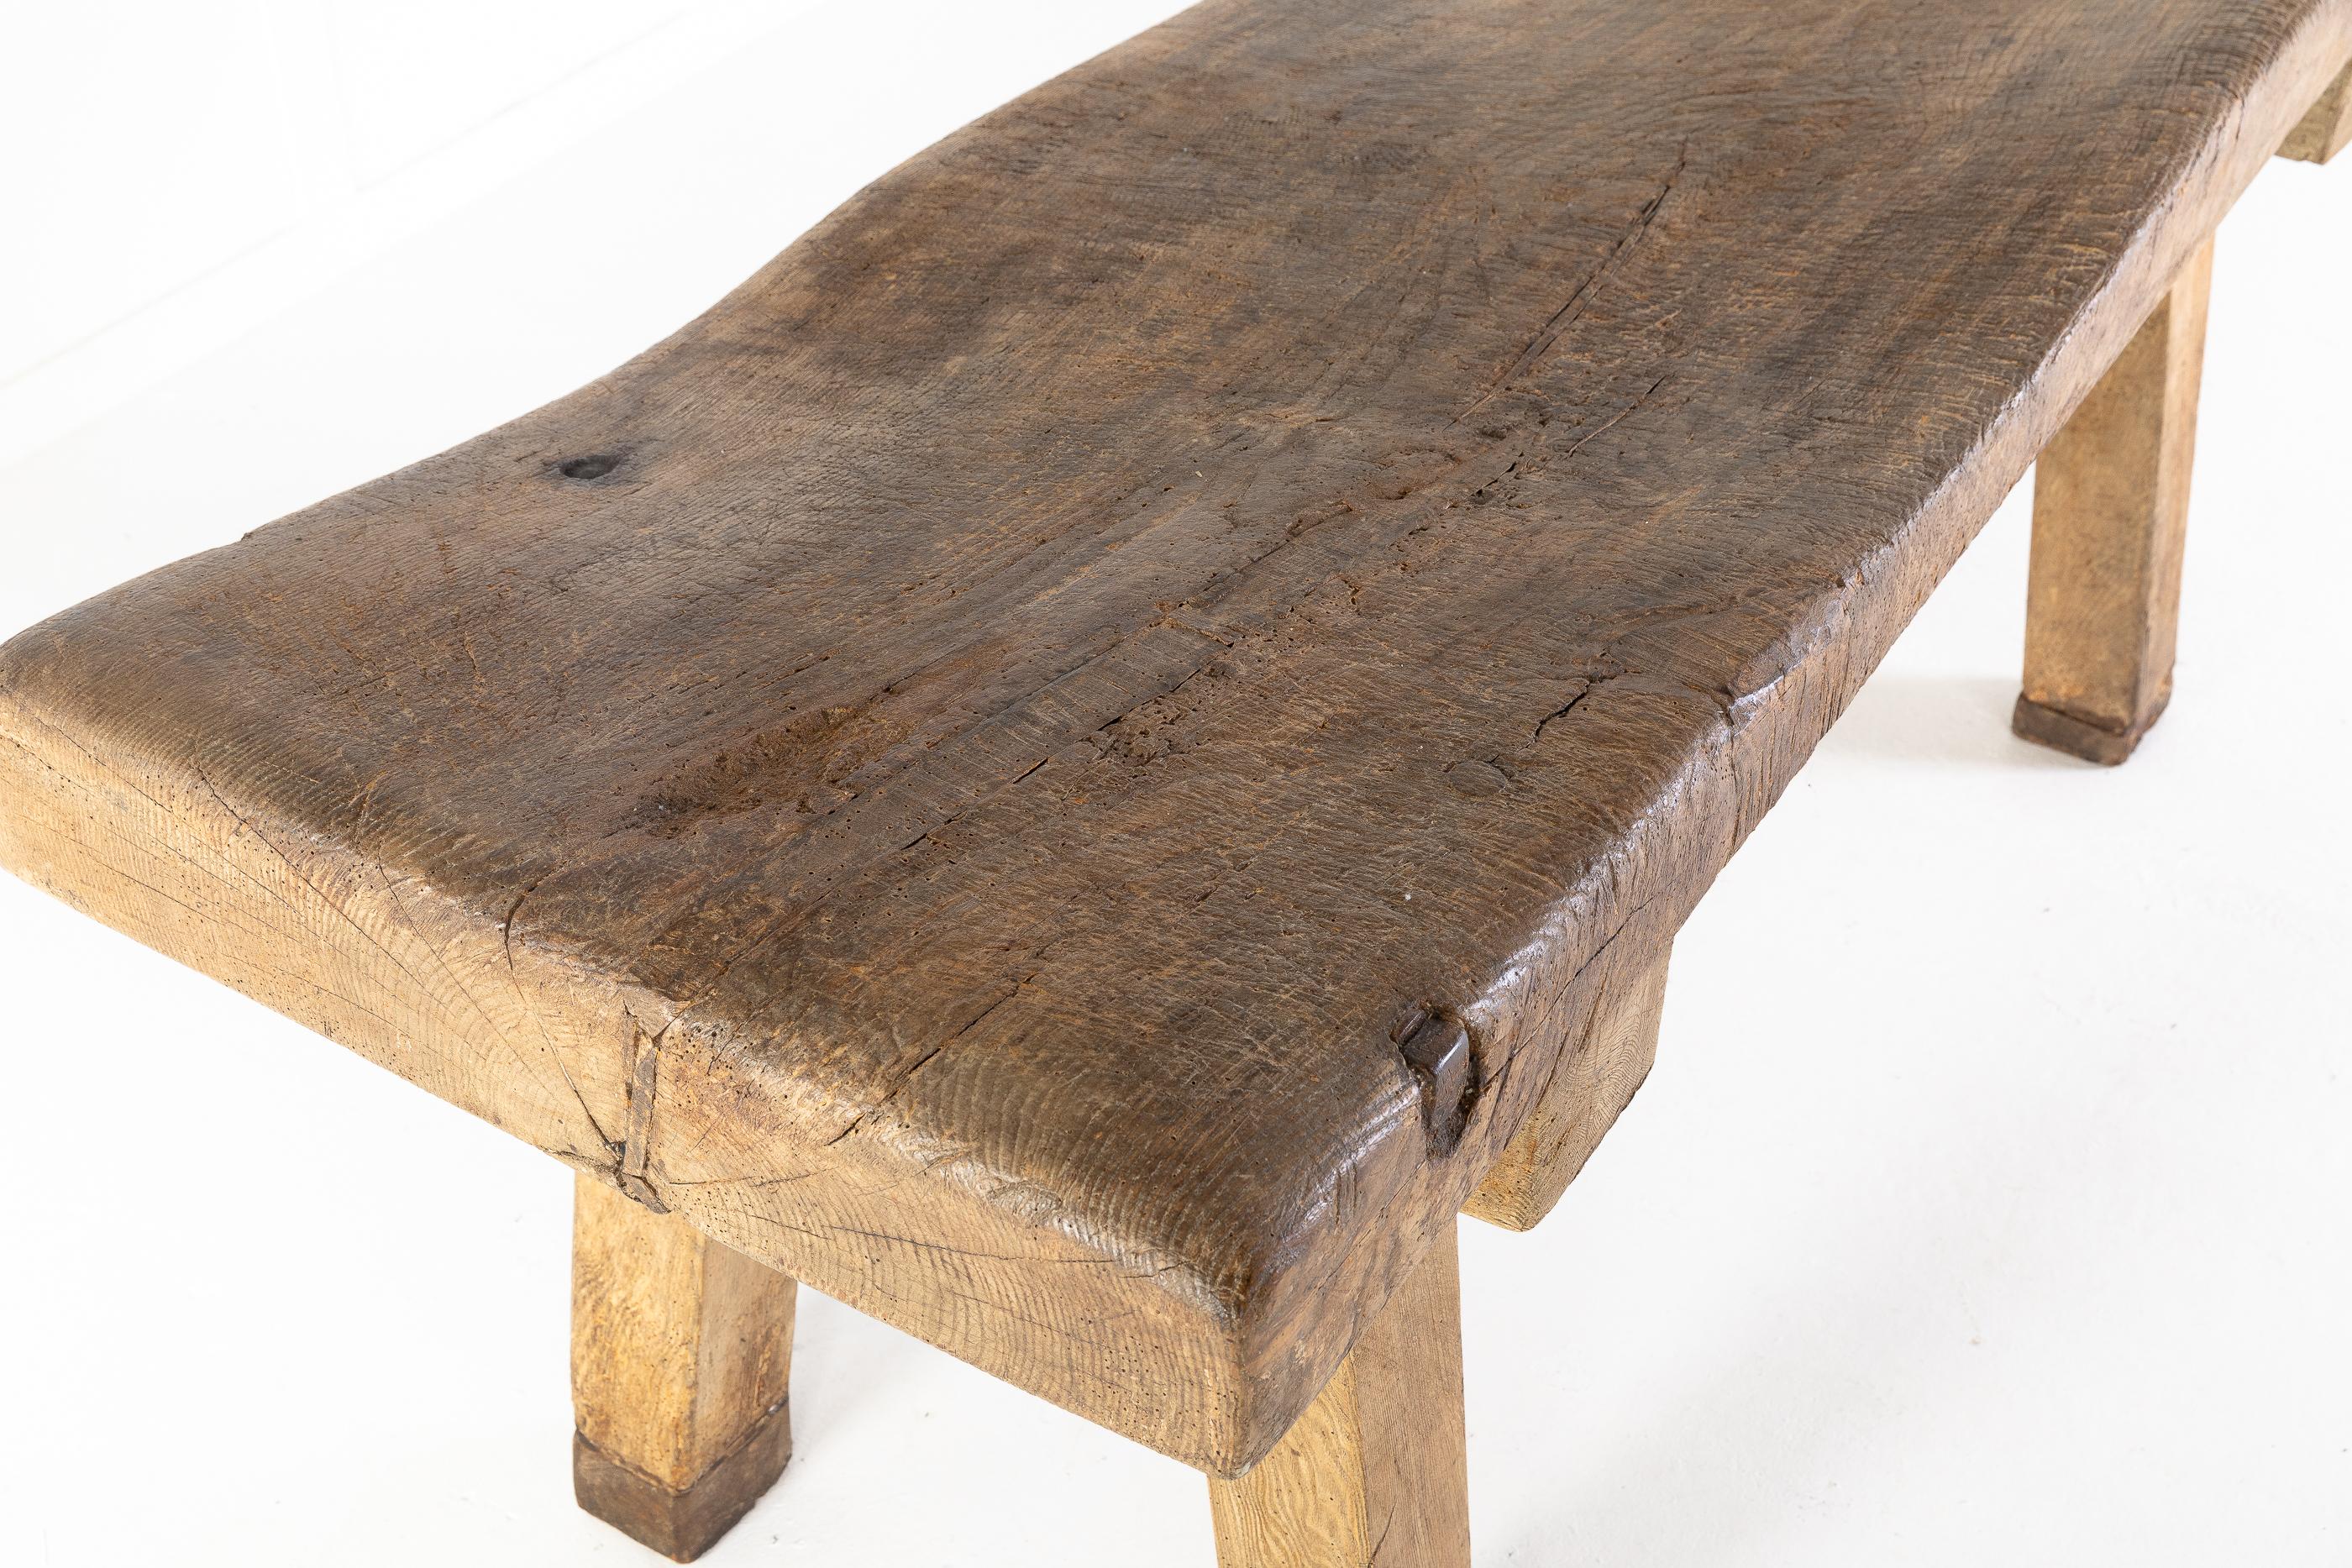 Wonderful rustic 19th century English chopping block with years of use making it an interesting console or side table.

Good heavy table with nice original patination.
 